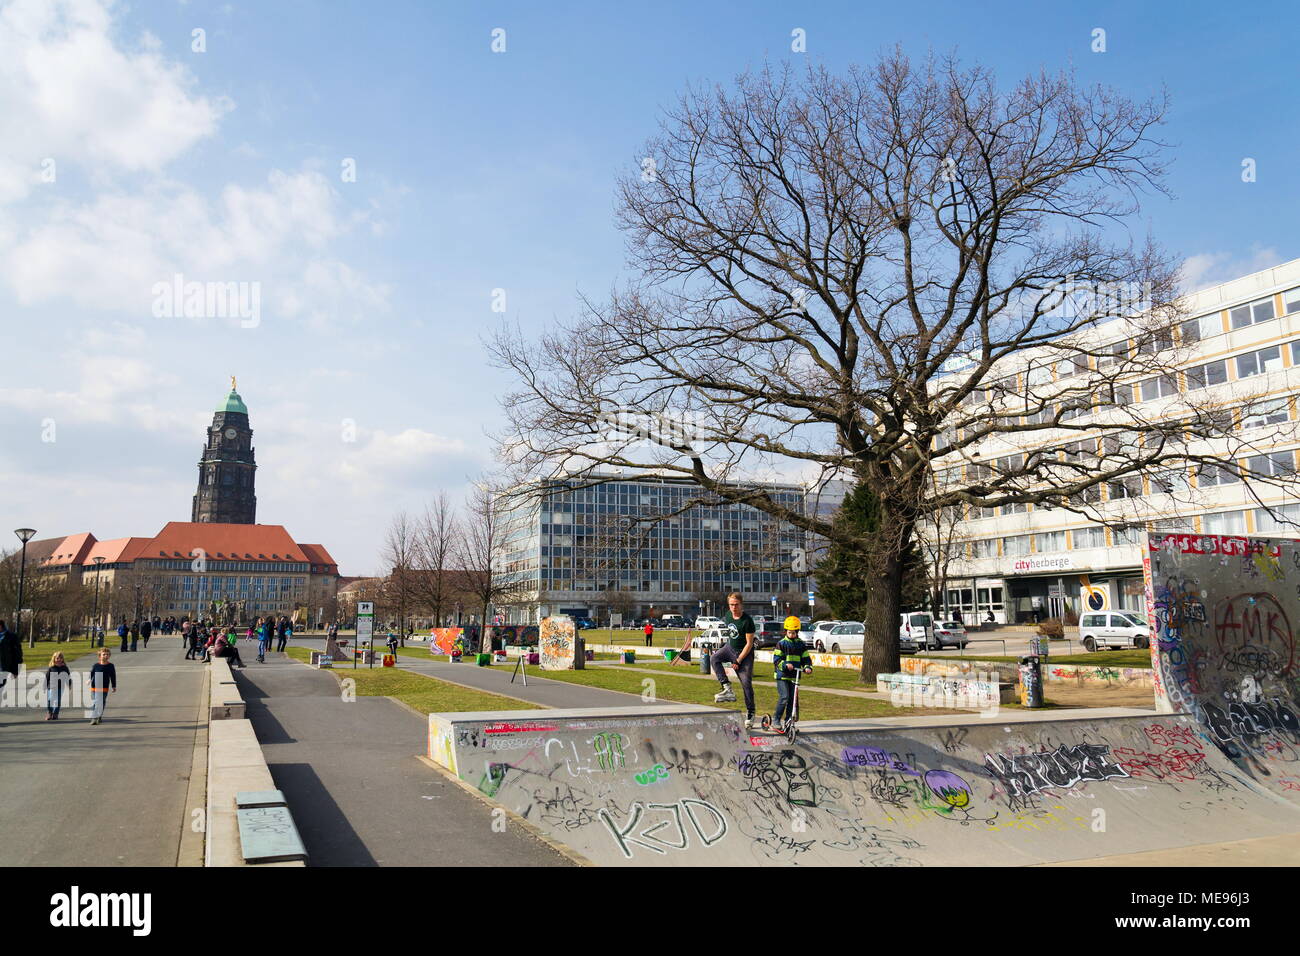 DRESDEN, GERMANY - APRIL 1 2018: People in Lingneralle skatepark with City Hall in background on April 1, 2018 in Dresden, Germany. Stock Photo